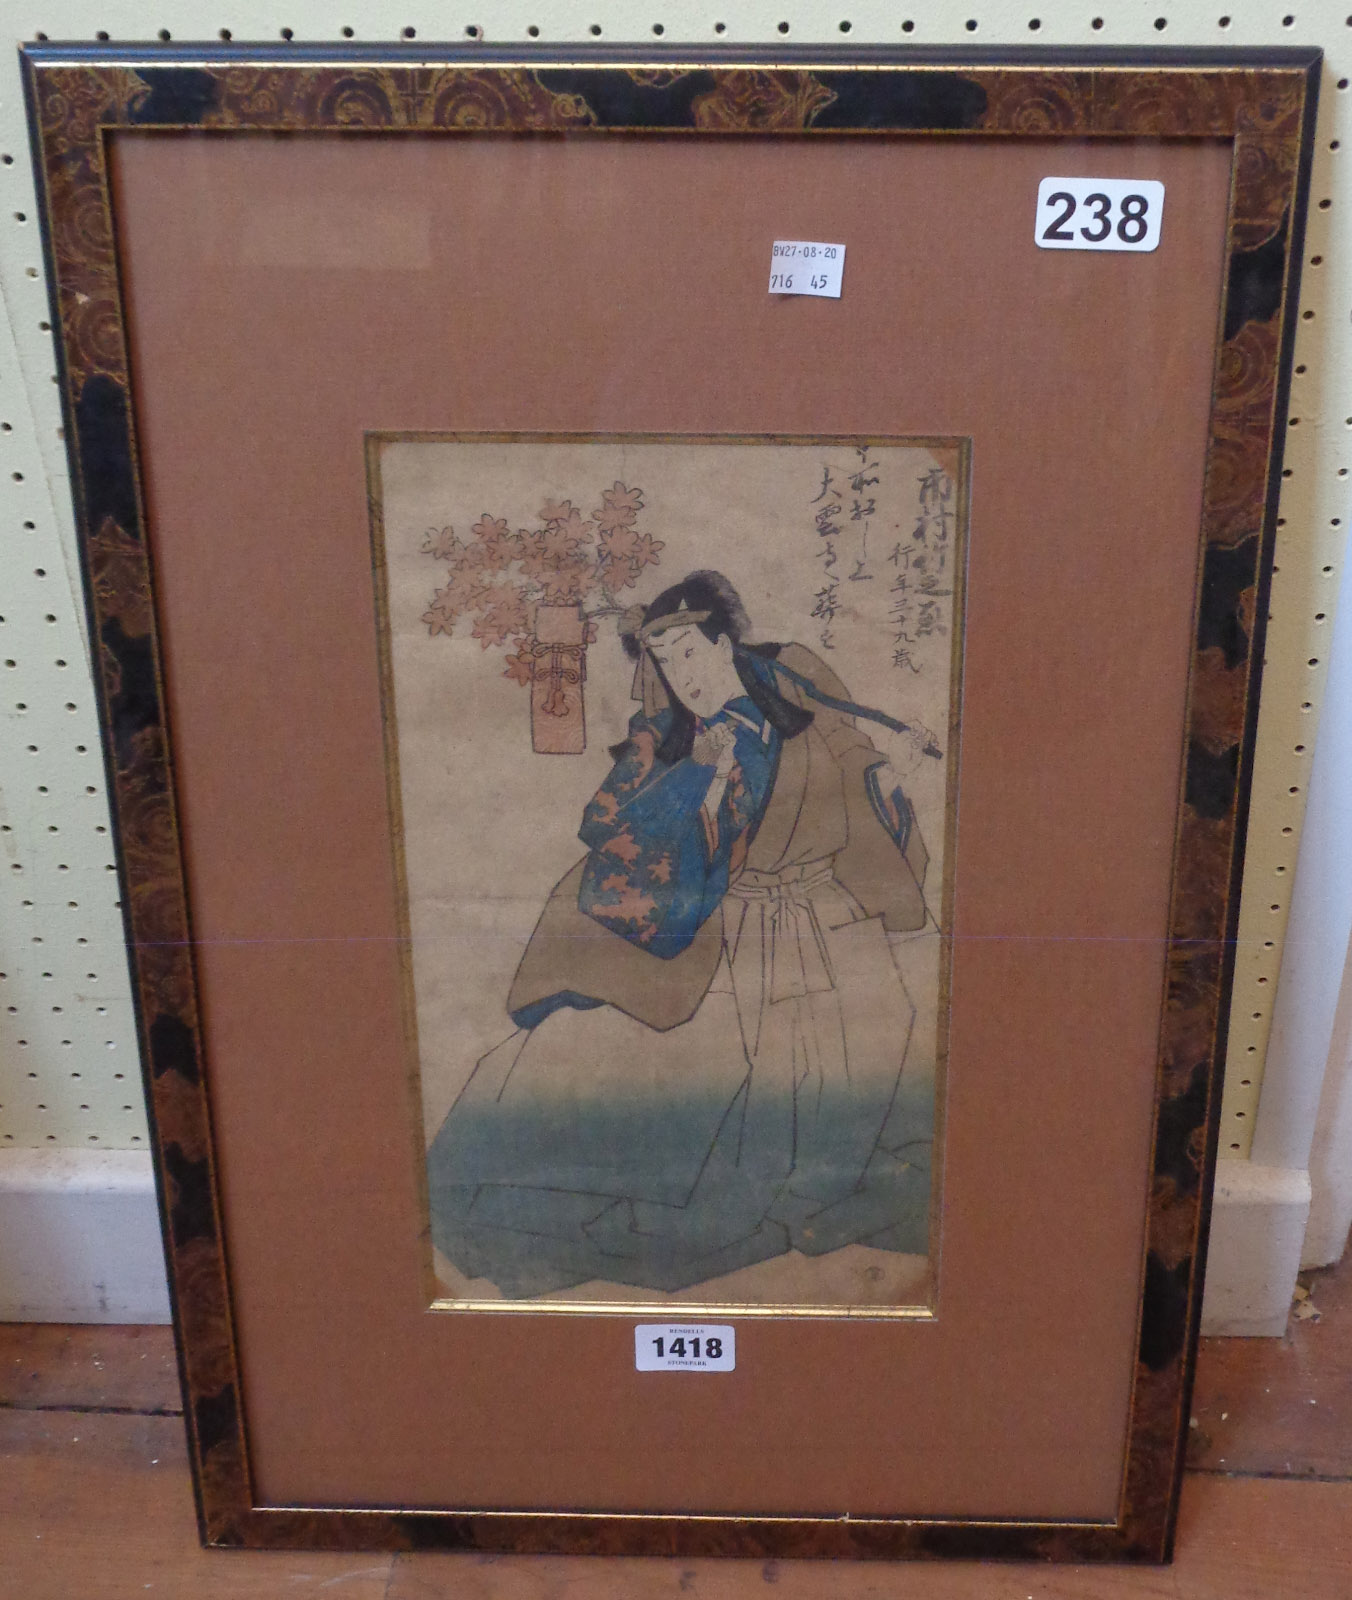 A lacquered framed Japanese wood block print, depicting a figure carrying a flowering branch with - Image 2 of 9